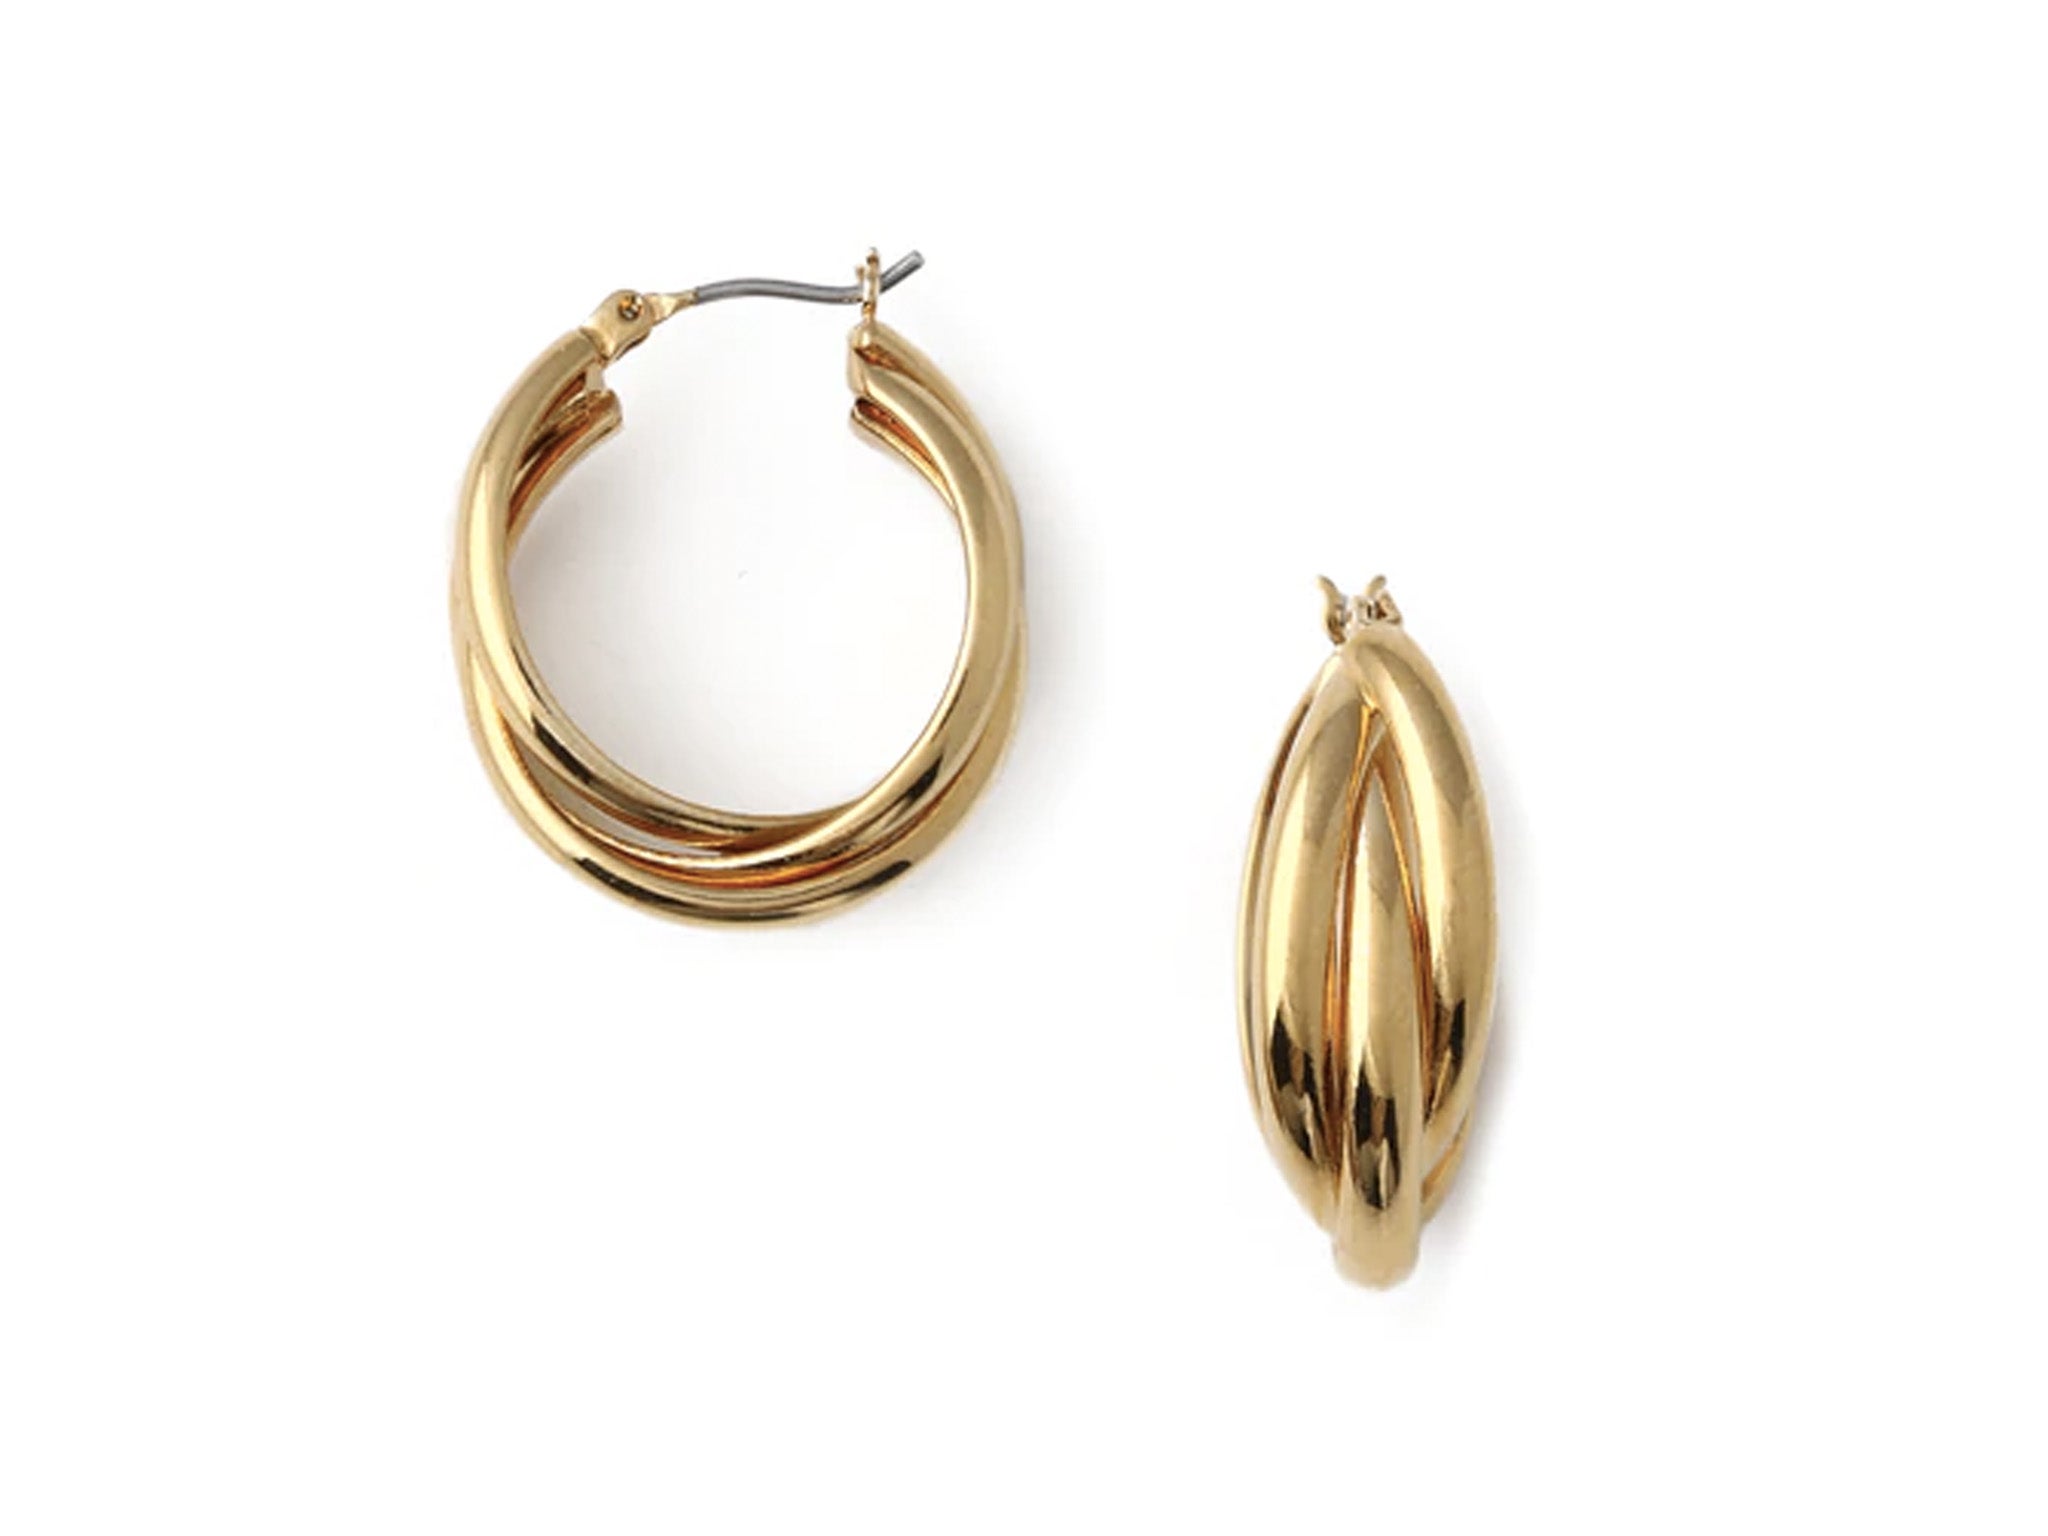 Best gold hoop earrings 2022: From Mejuri's braided style to